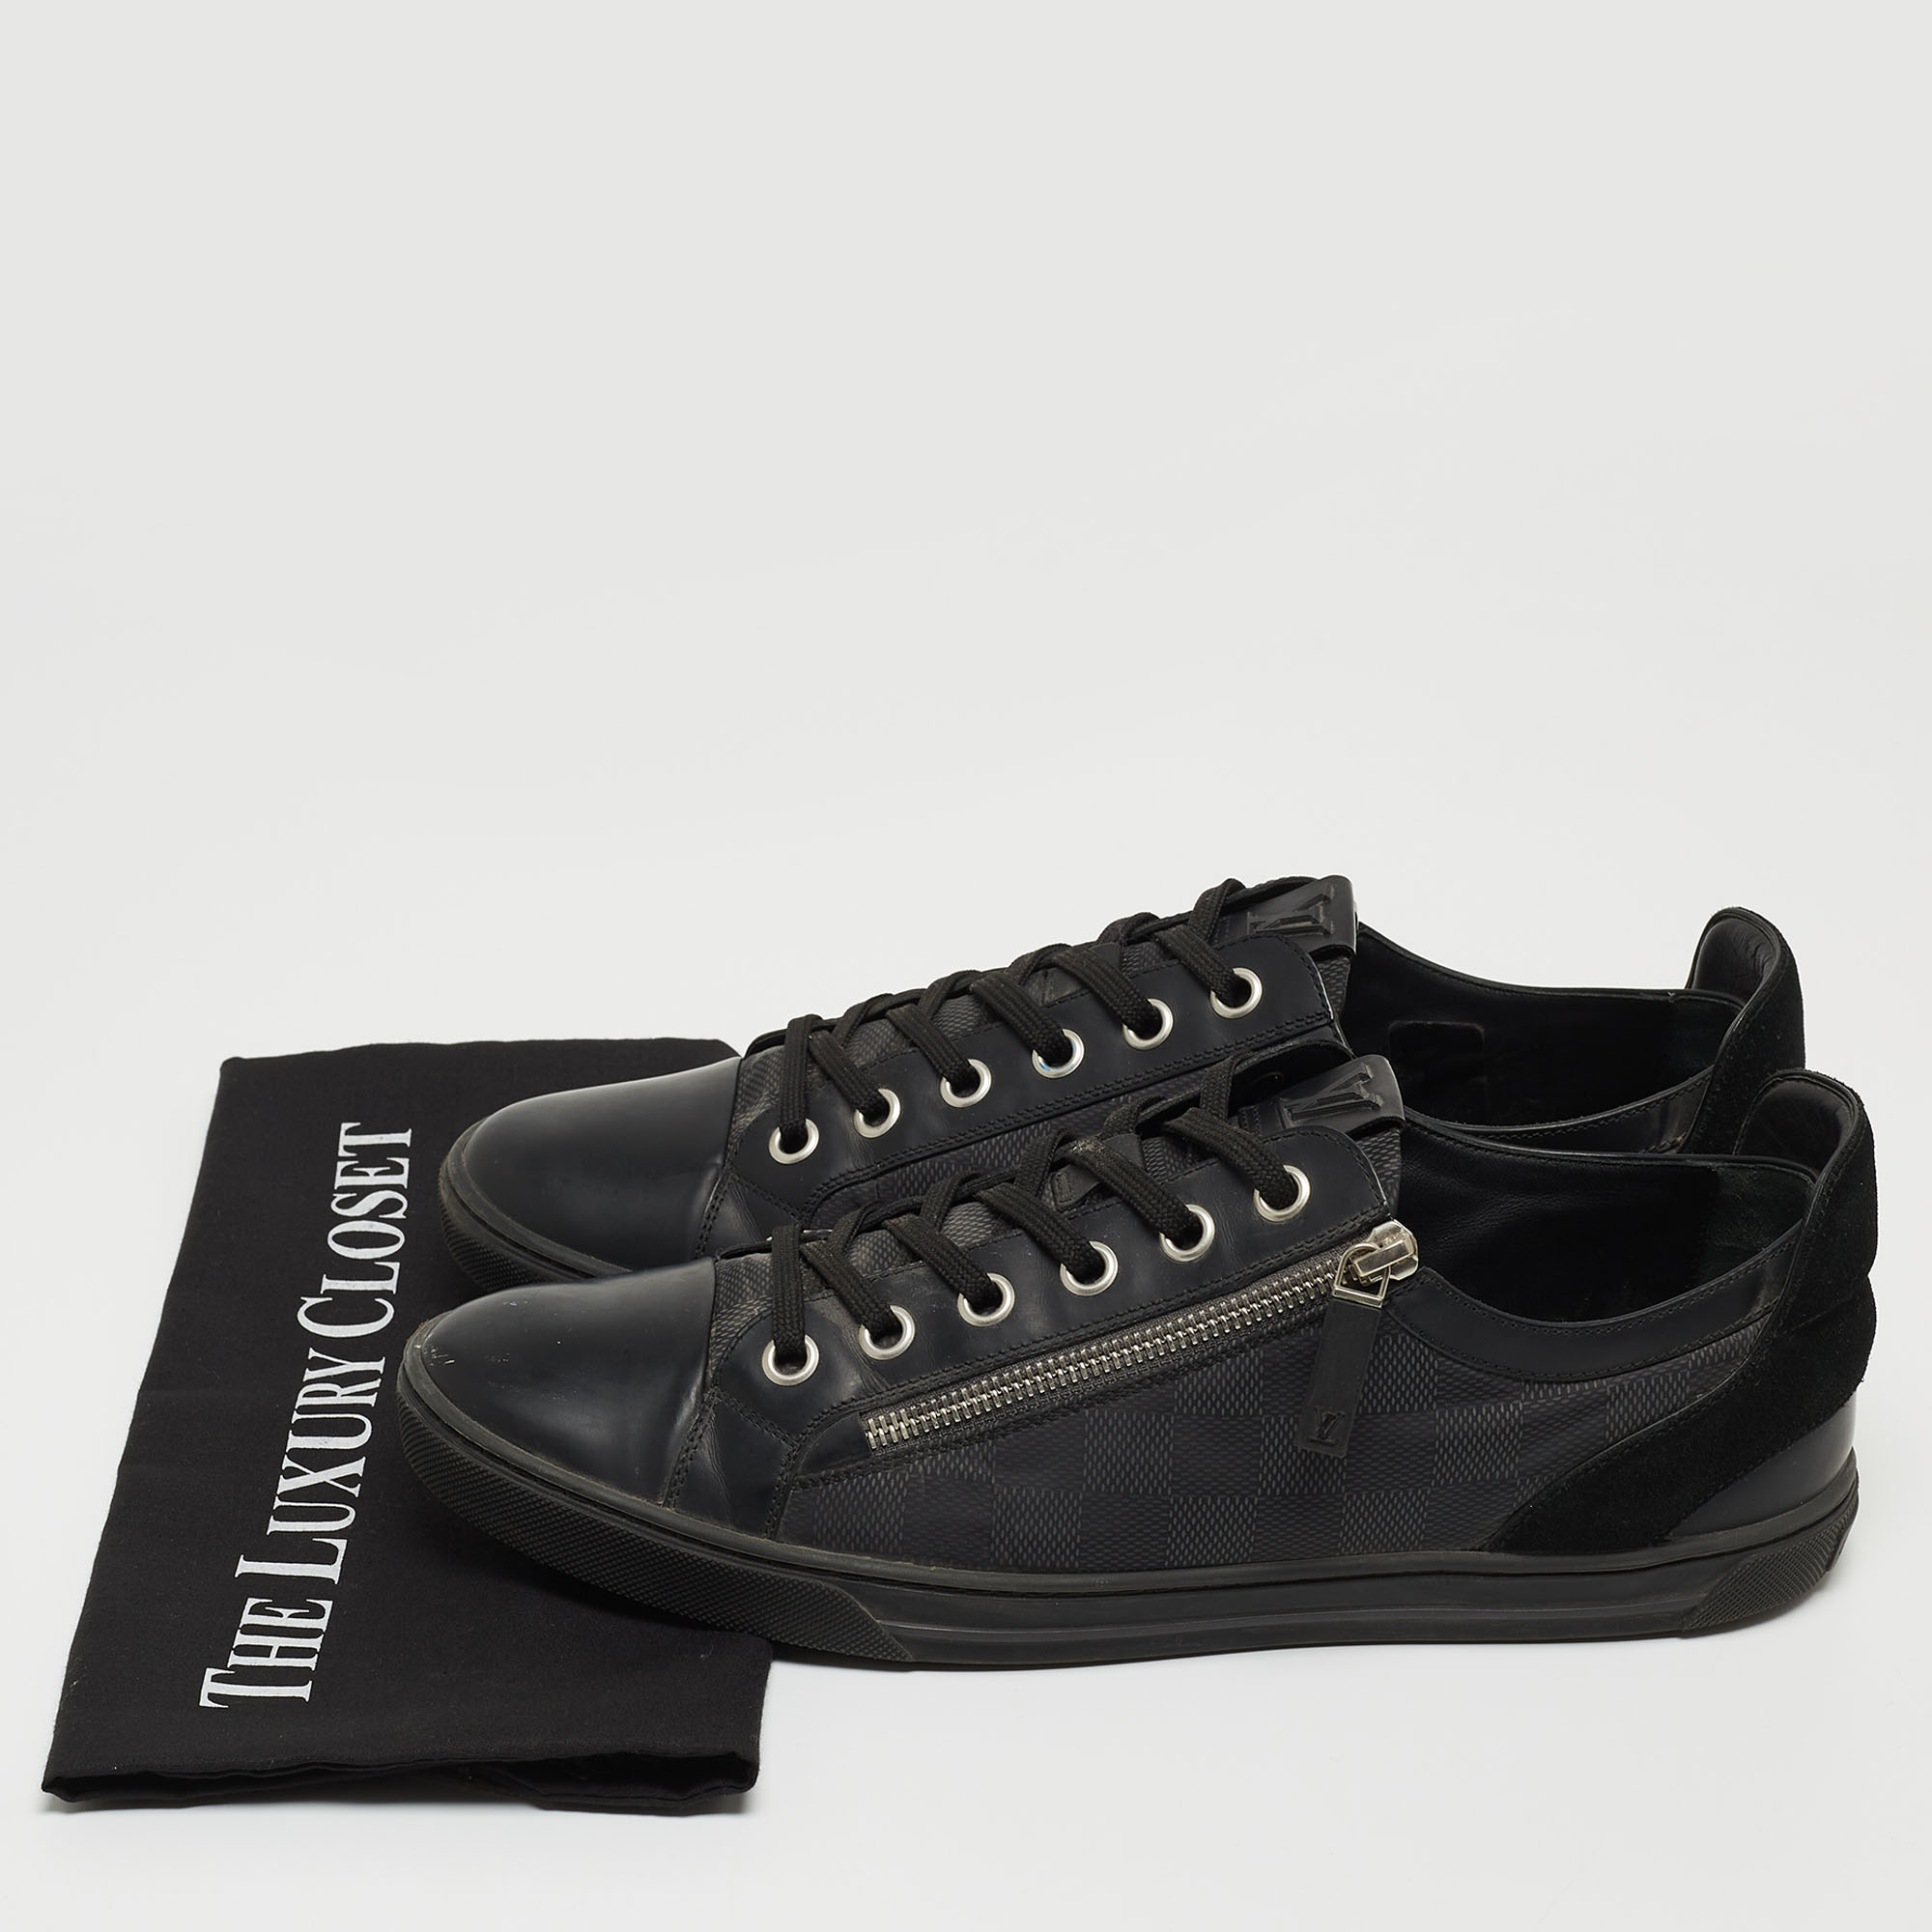 Louis Vuitton Black Leather And Damier Fabric Challenge Zip Up Sneakers Size 43